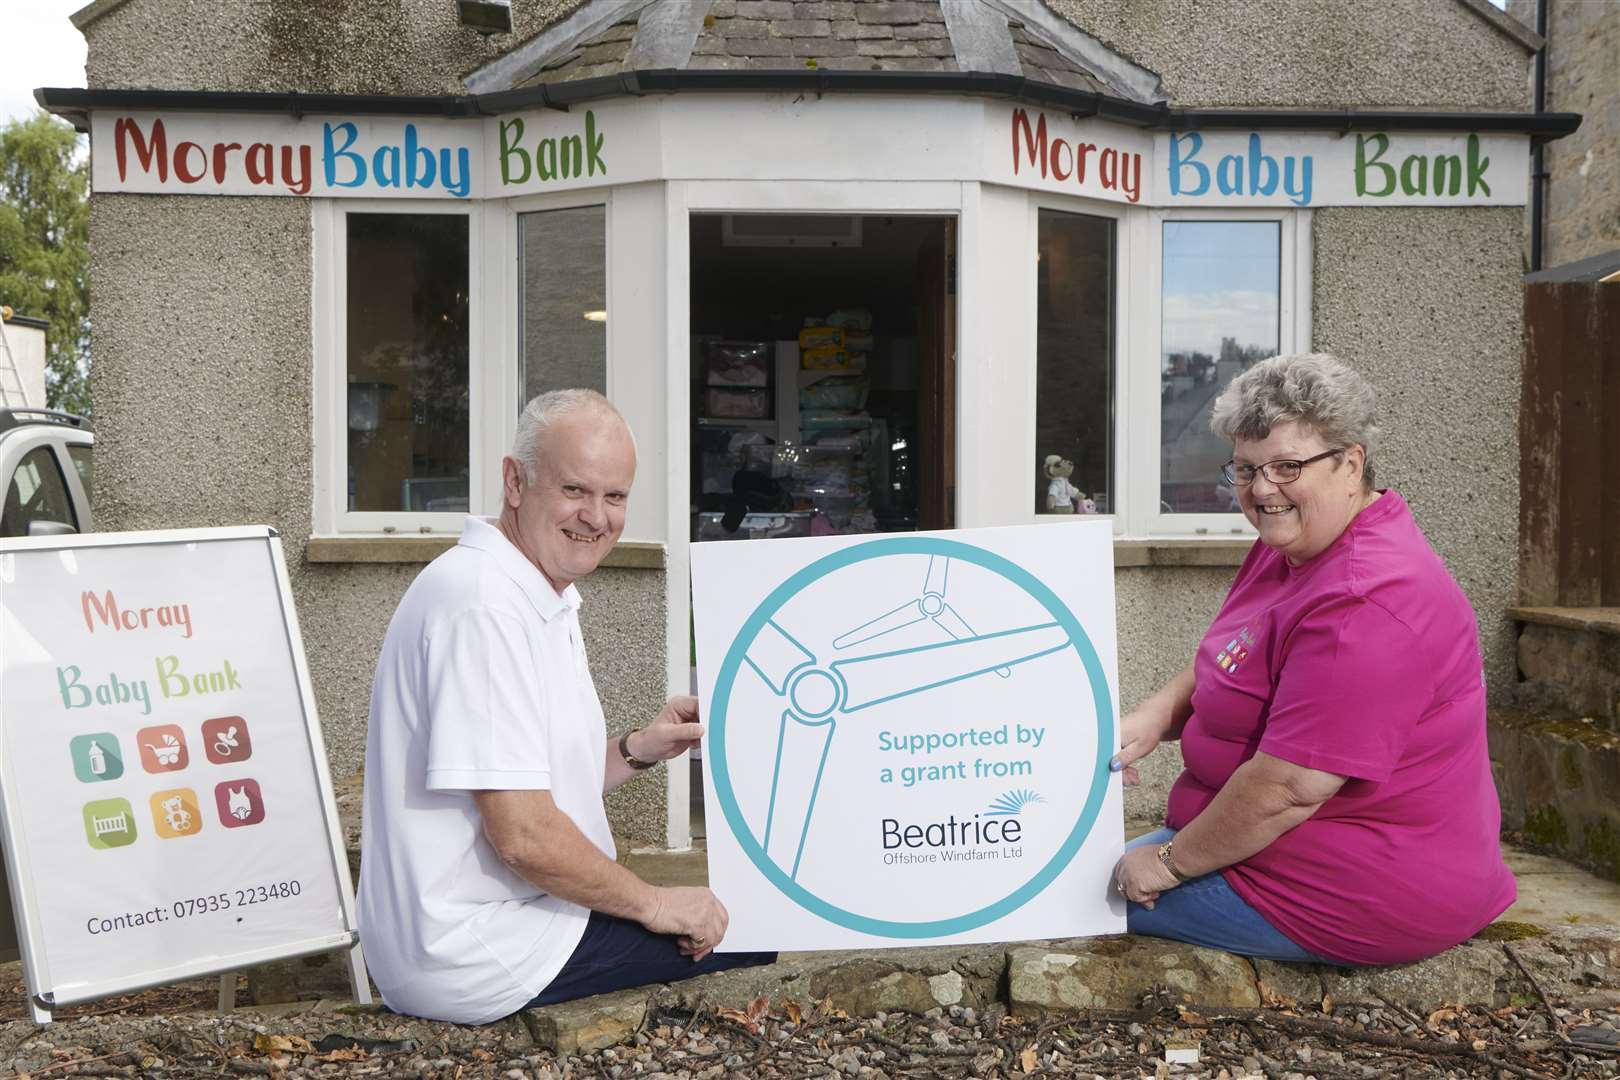 Ian and Susan Sutherland of Moray Baby Bank which received funding from the Beatrice Partnership Fund to buy a new electric van for use in collecting donated baby items for distribution to families in need of support. Picture: Ewen Weatherspoon